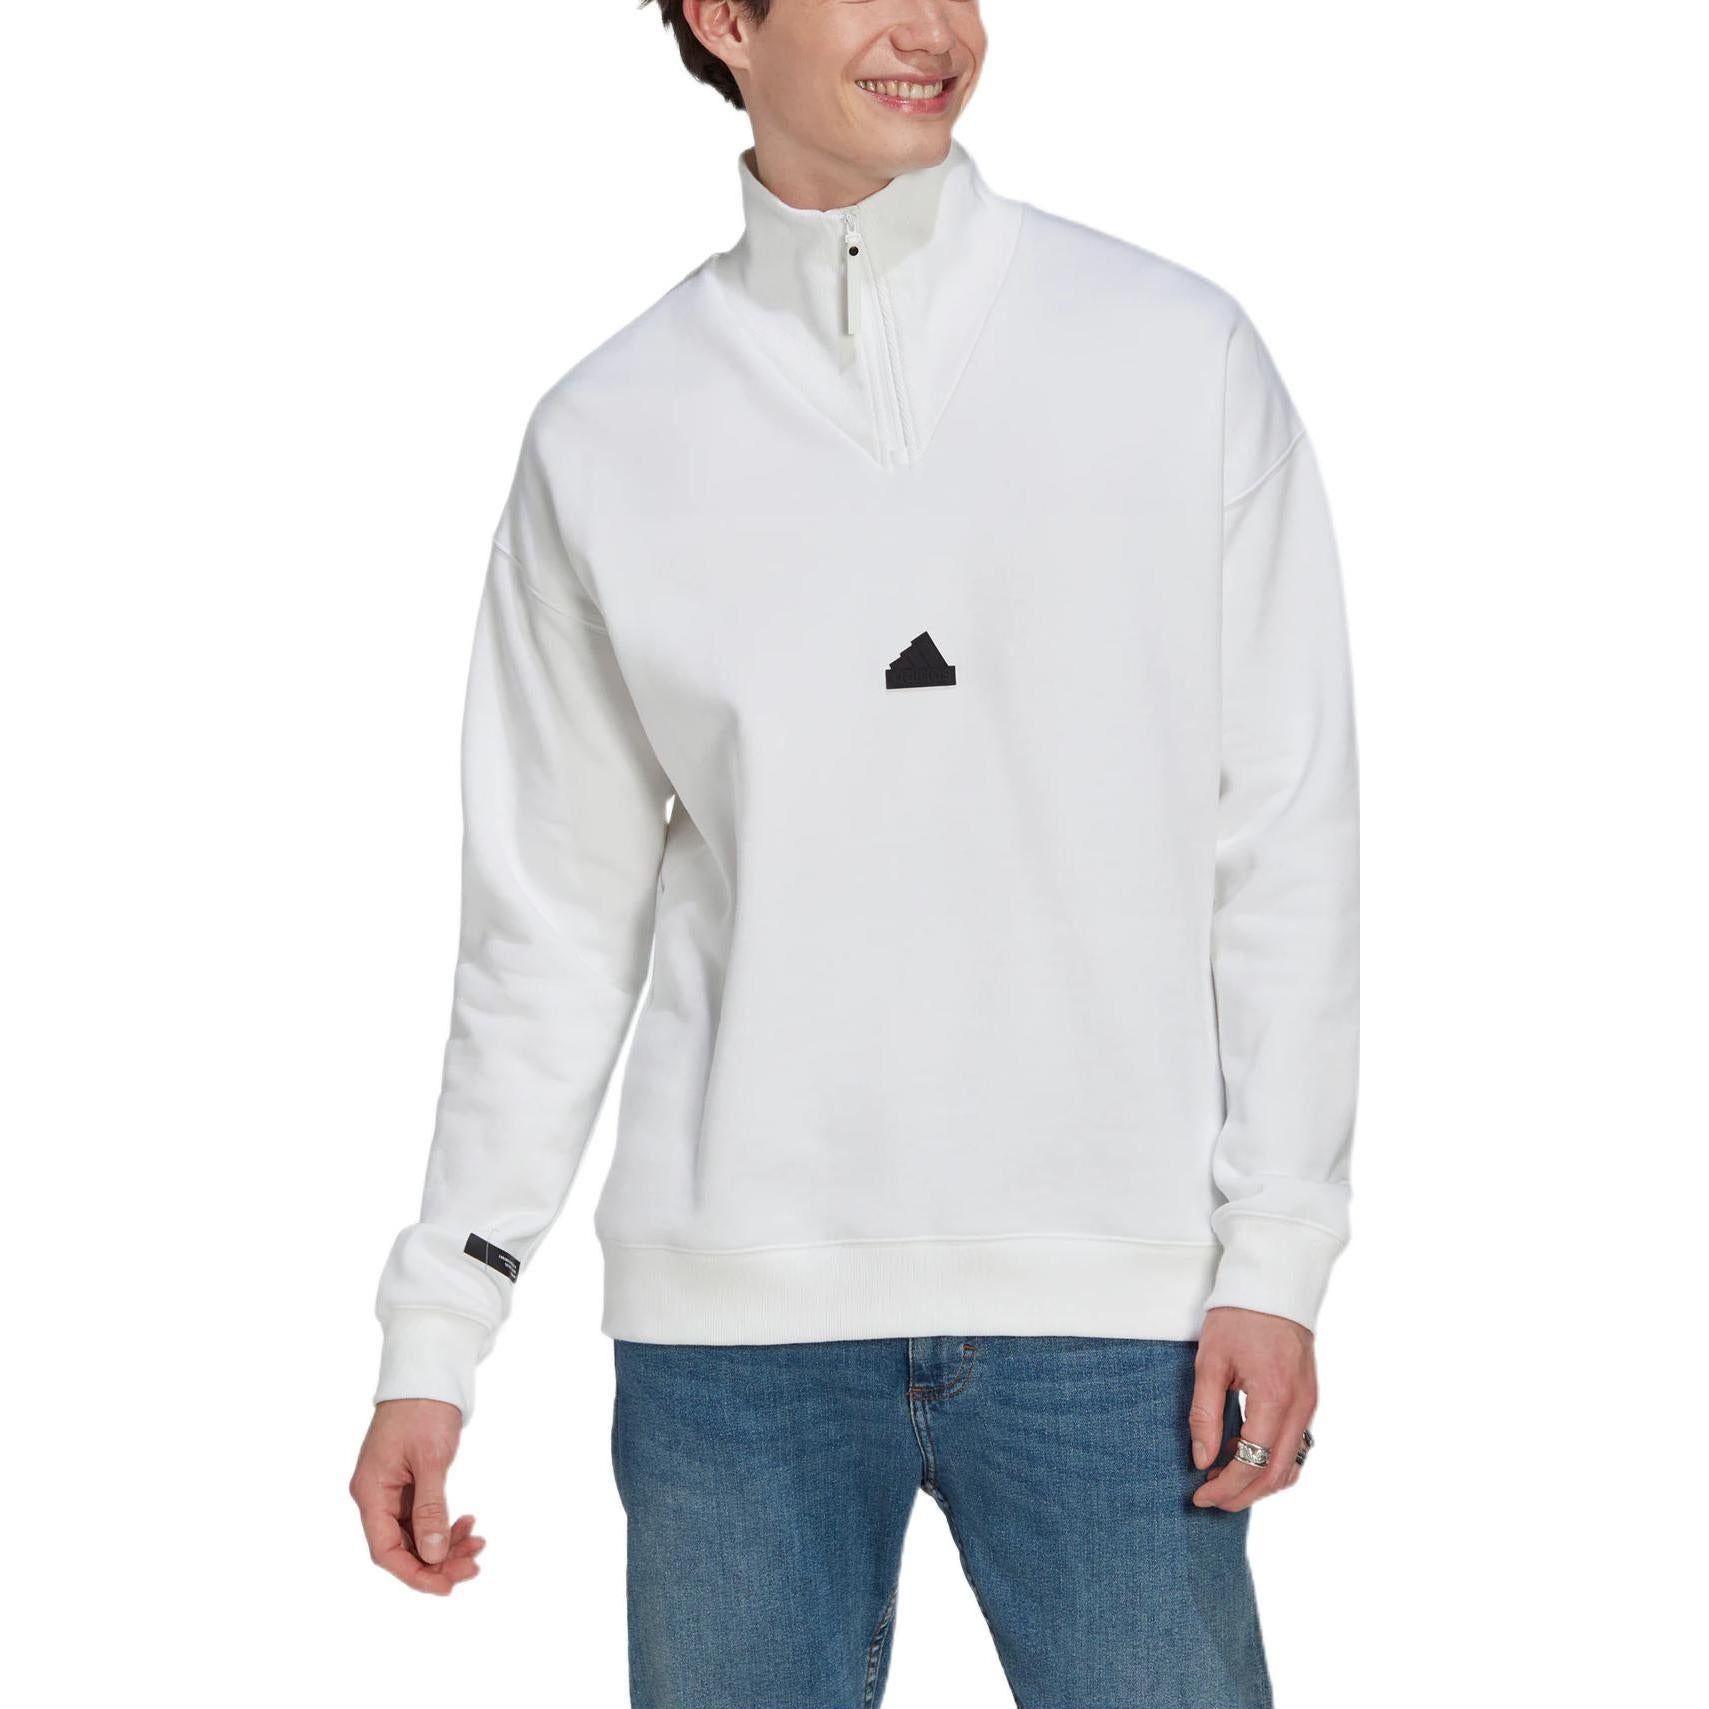 Men's adidas New 1/2-zip Solid Color Small Logo Half Zipper Pullover Stand Collar Long Sleeves White - 2